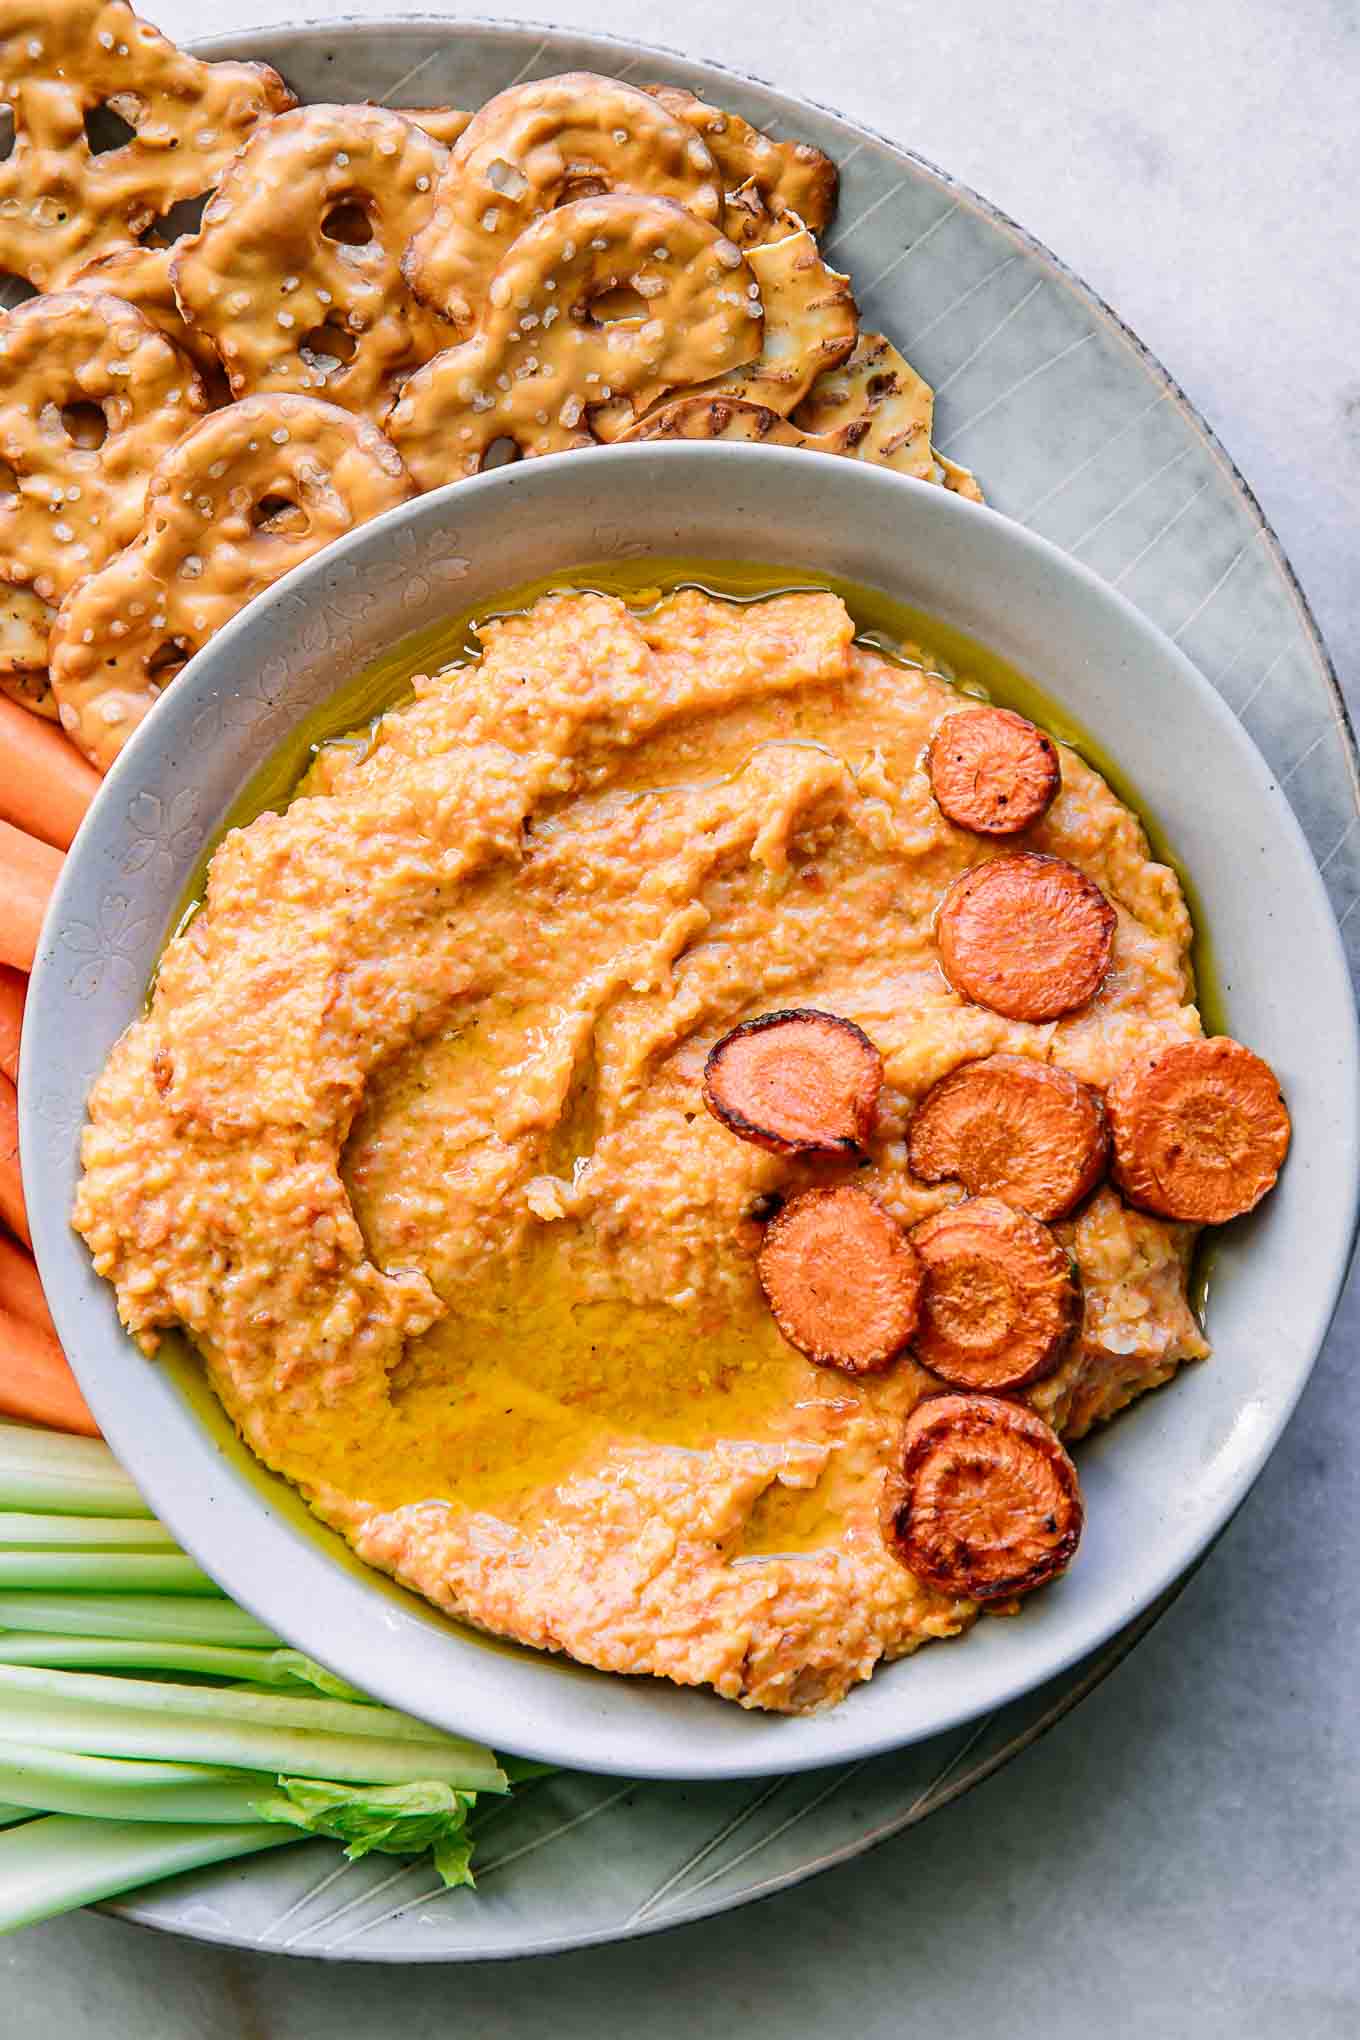 a bowl of orange carrot hummus dip on a plate with celery, carrots, and pretzels